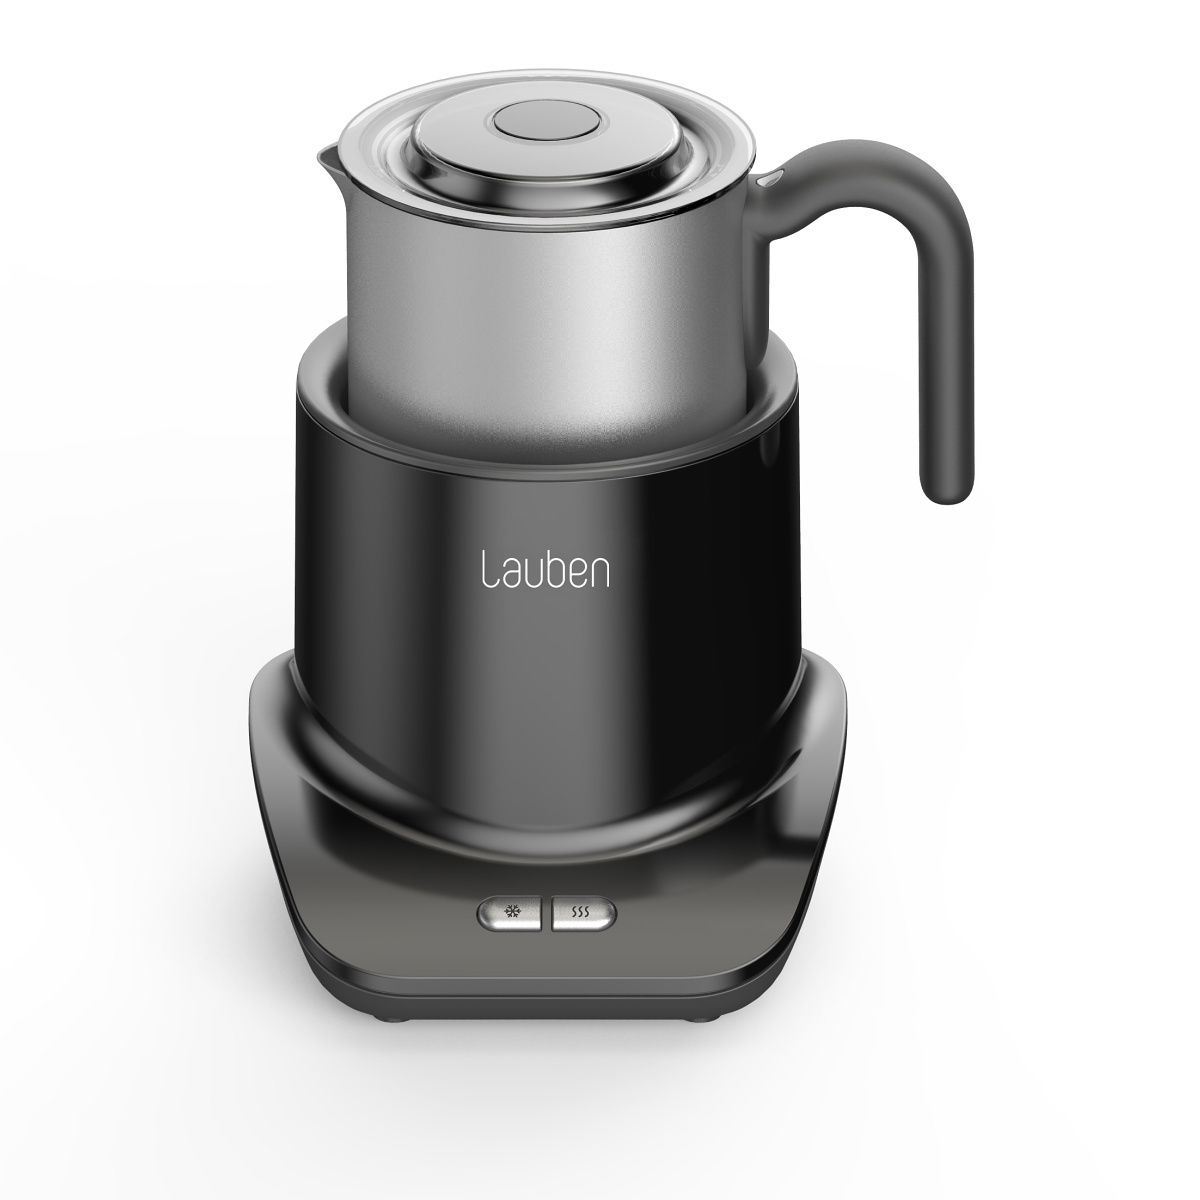 Lauben Milk Frother 550BC - Your barista at home